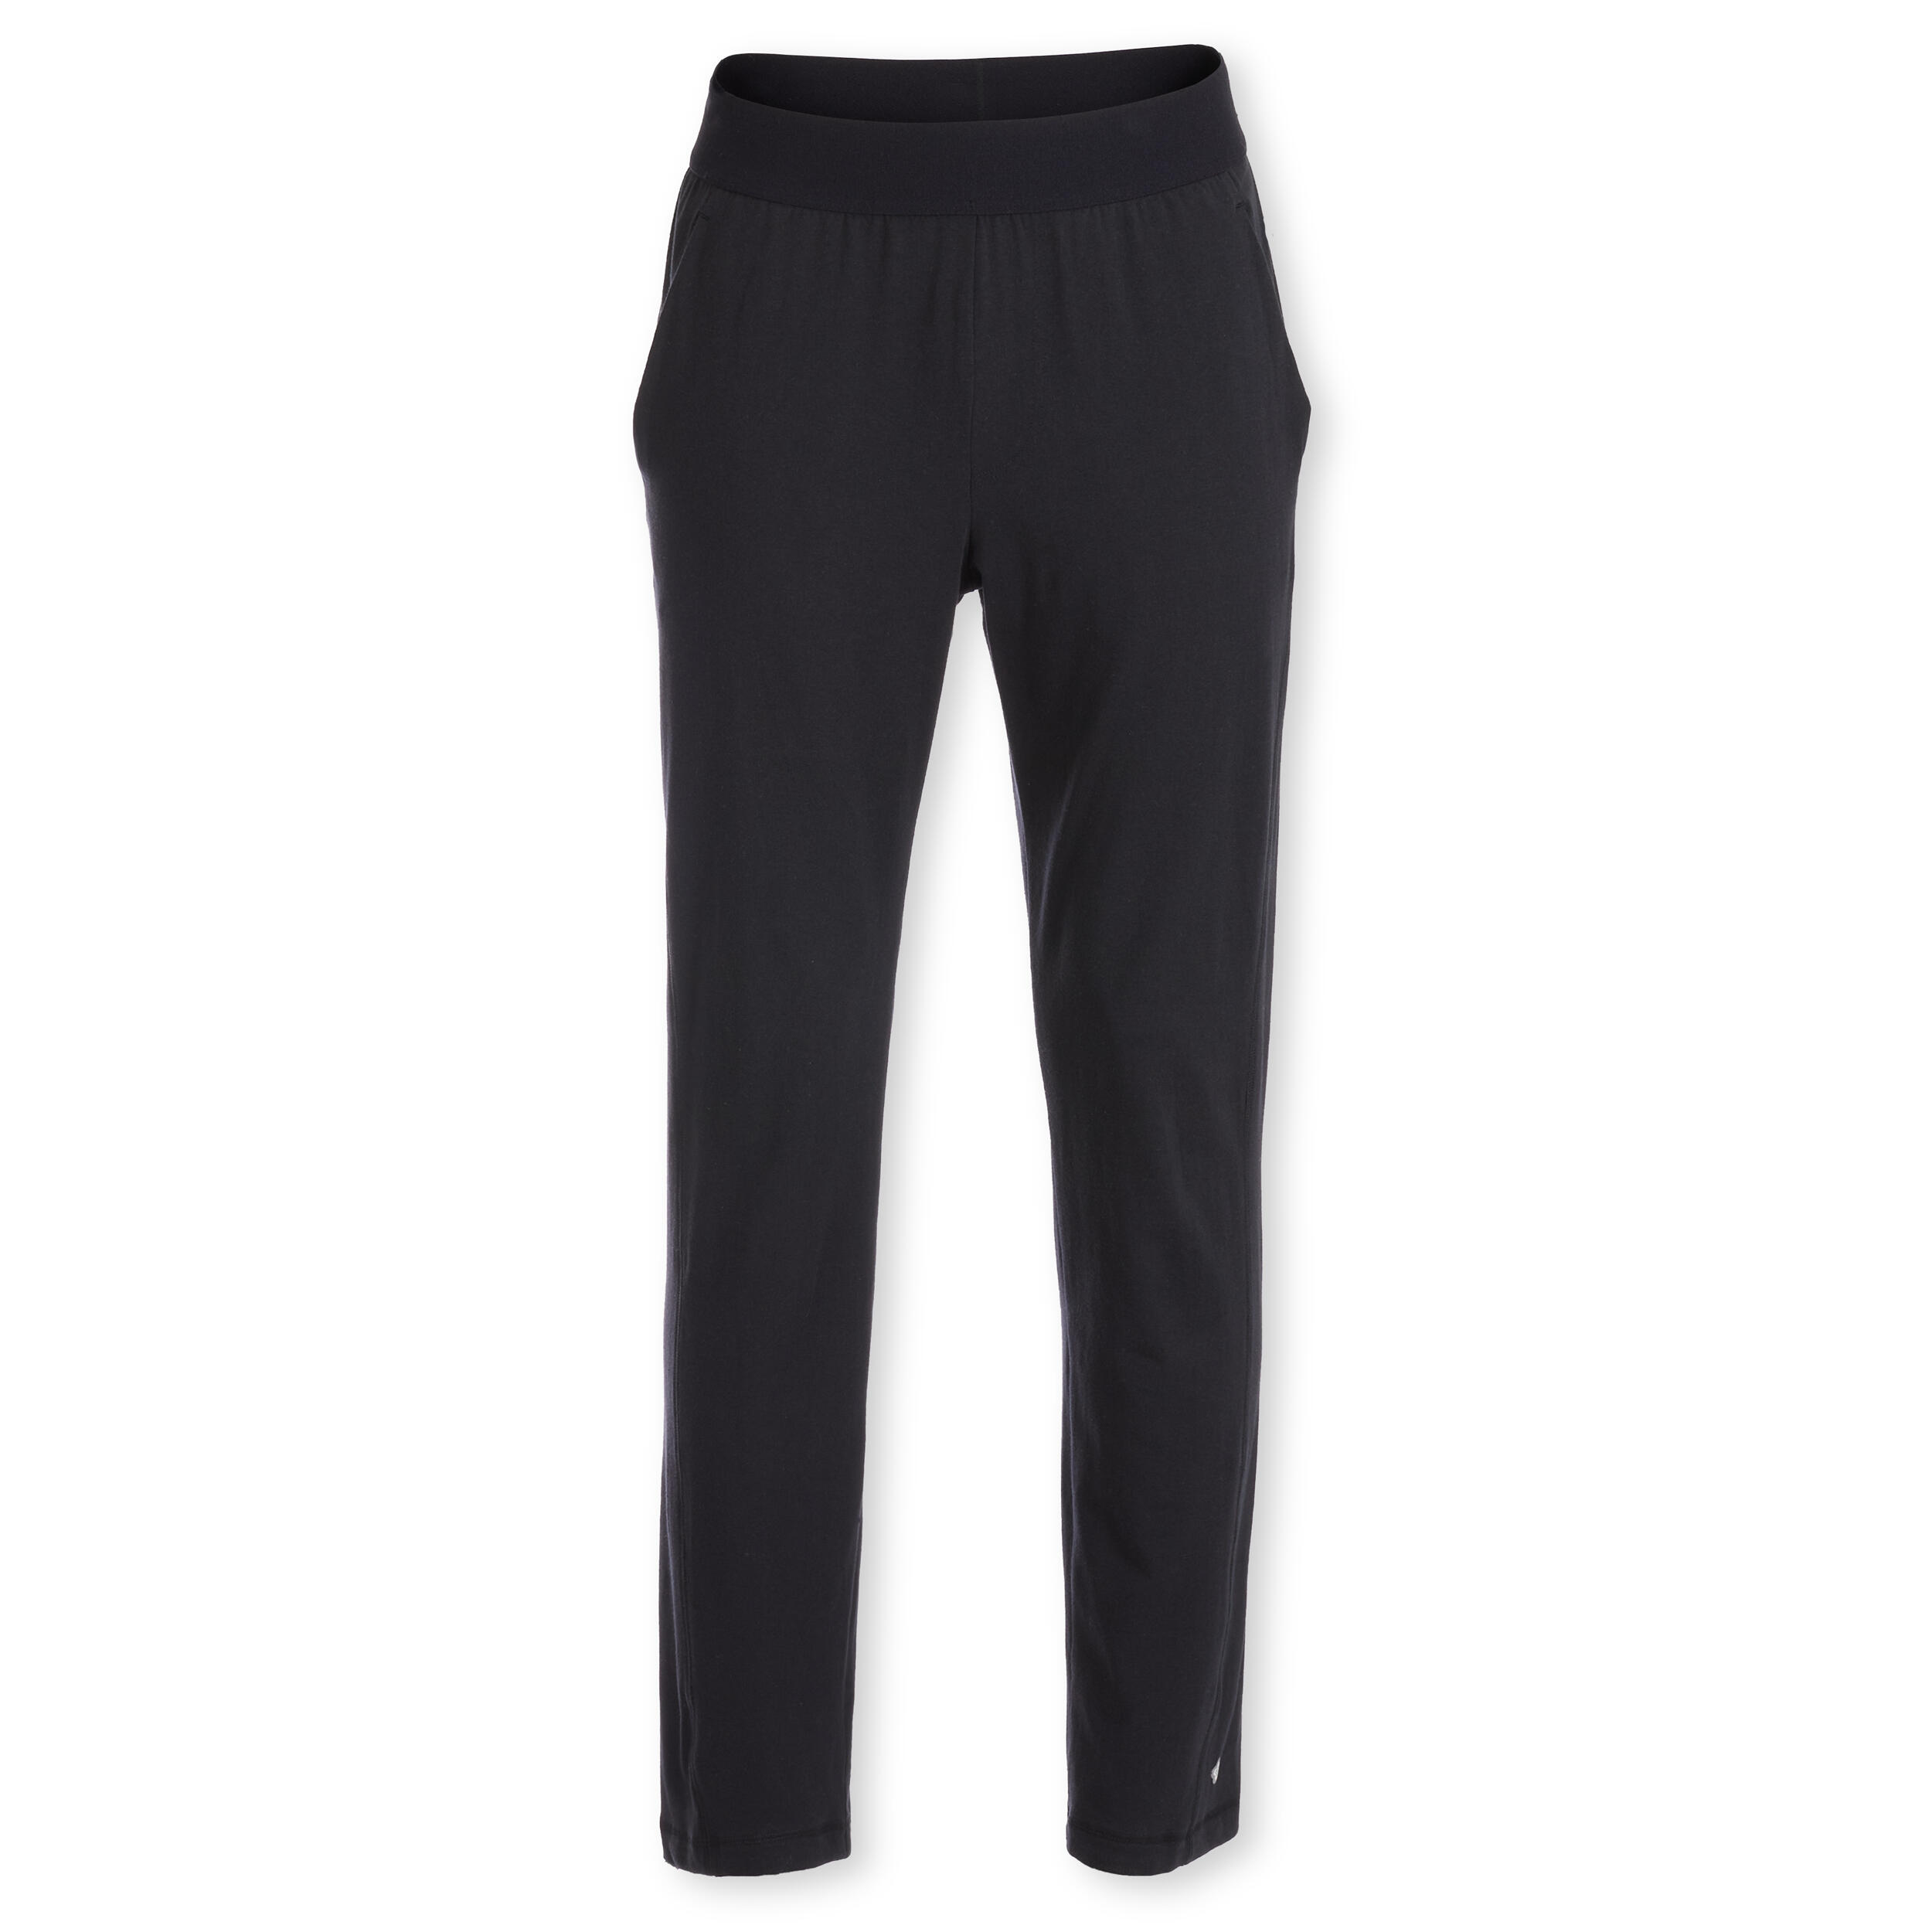 Gym Leggings and Trousers